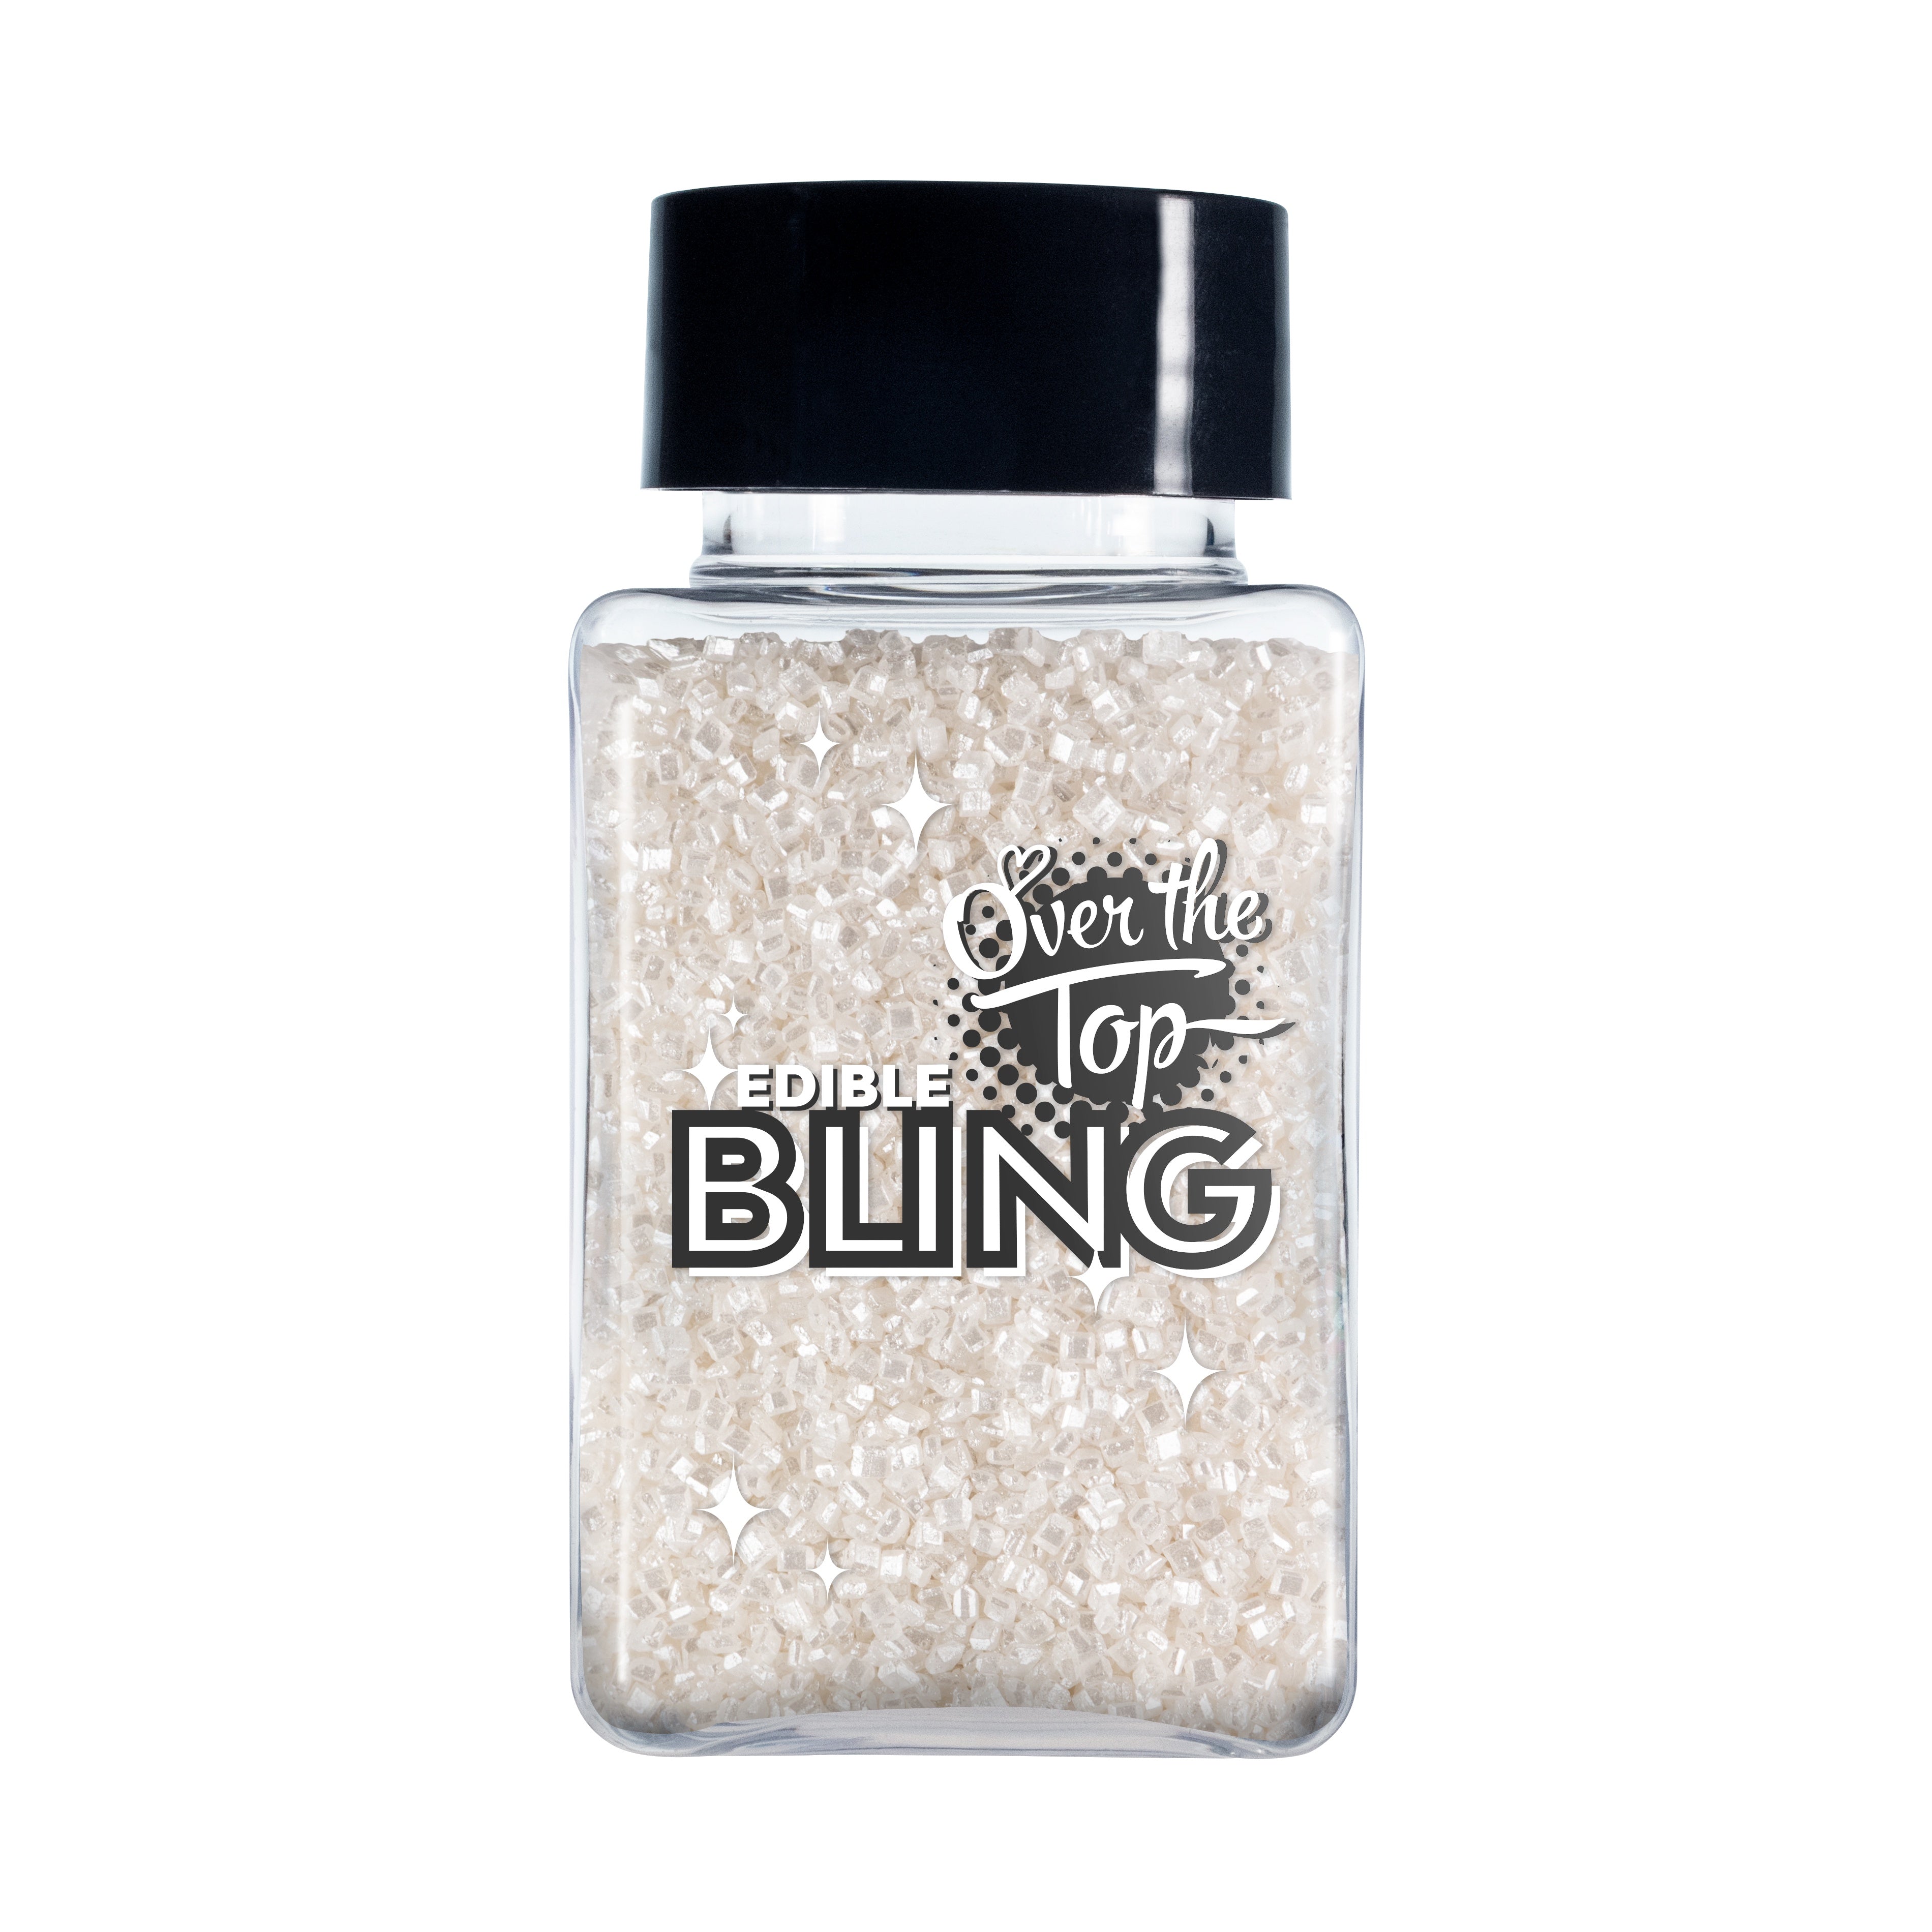 Over The Top Edible Bling Sanding Sugar - Pearl White 80g